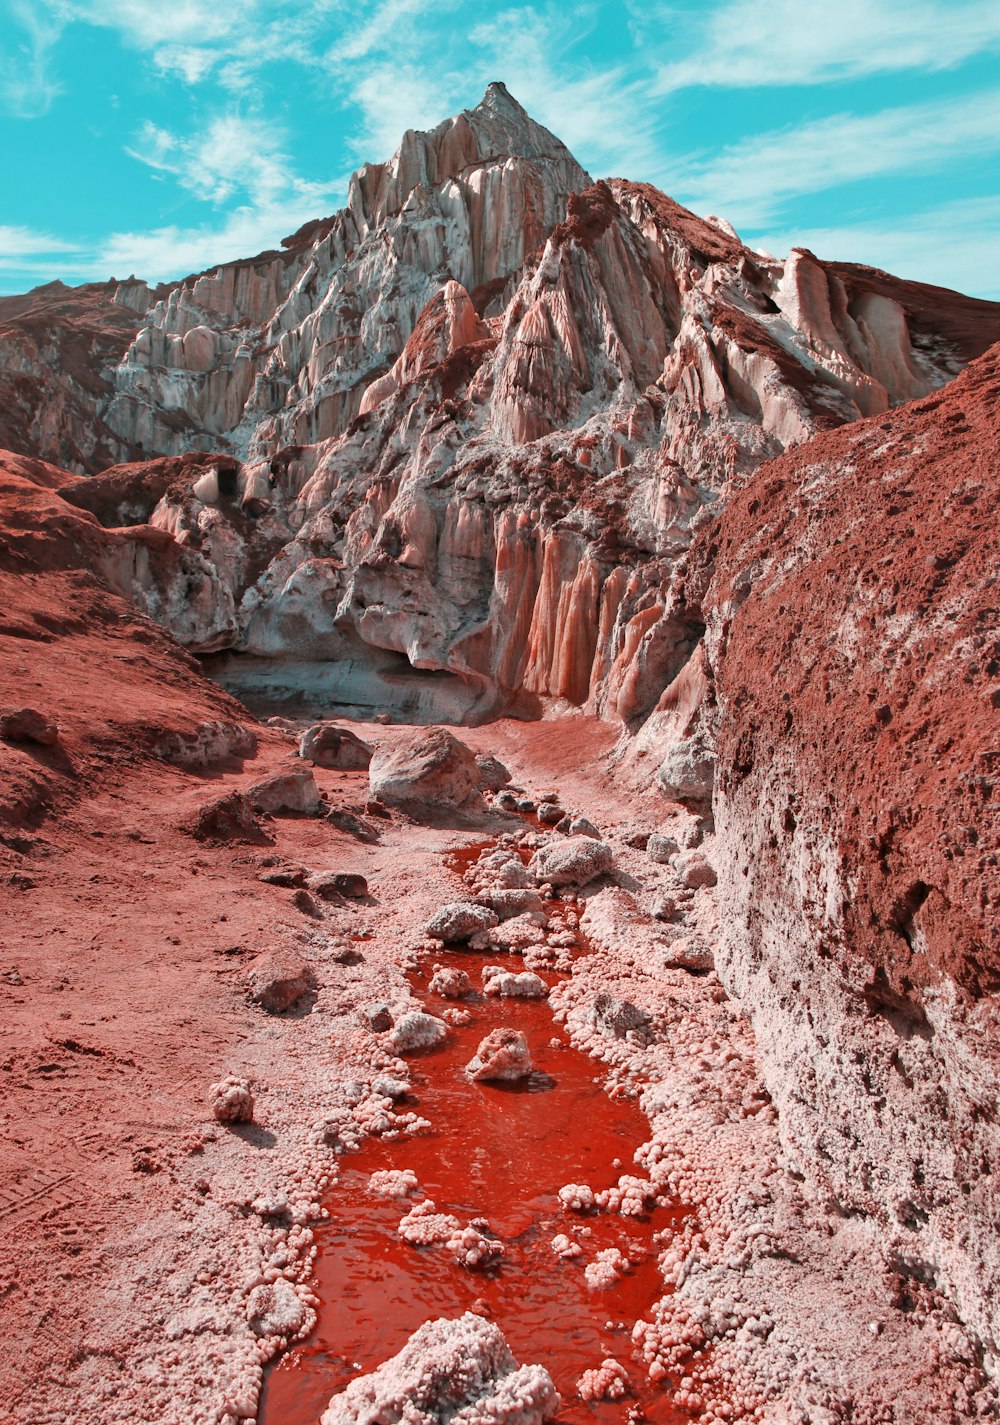 a rocky mountain with a red pool of water